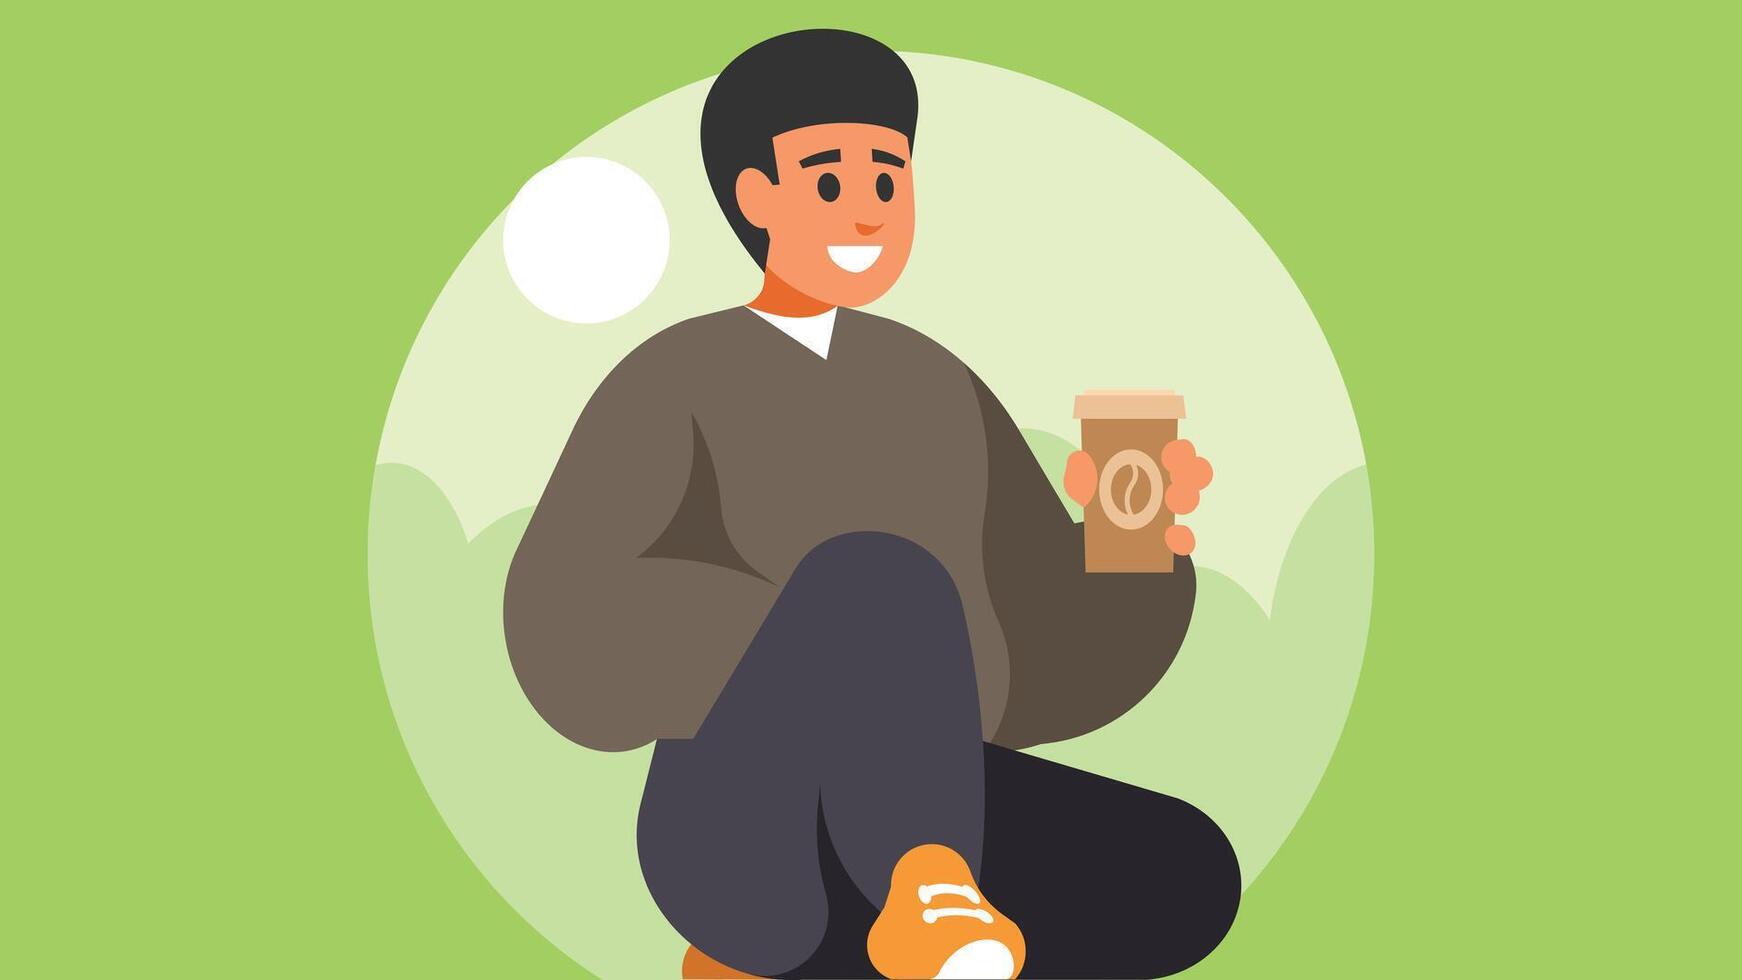 person hold a cup of coffee and sits on the ground illustration vector